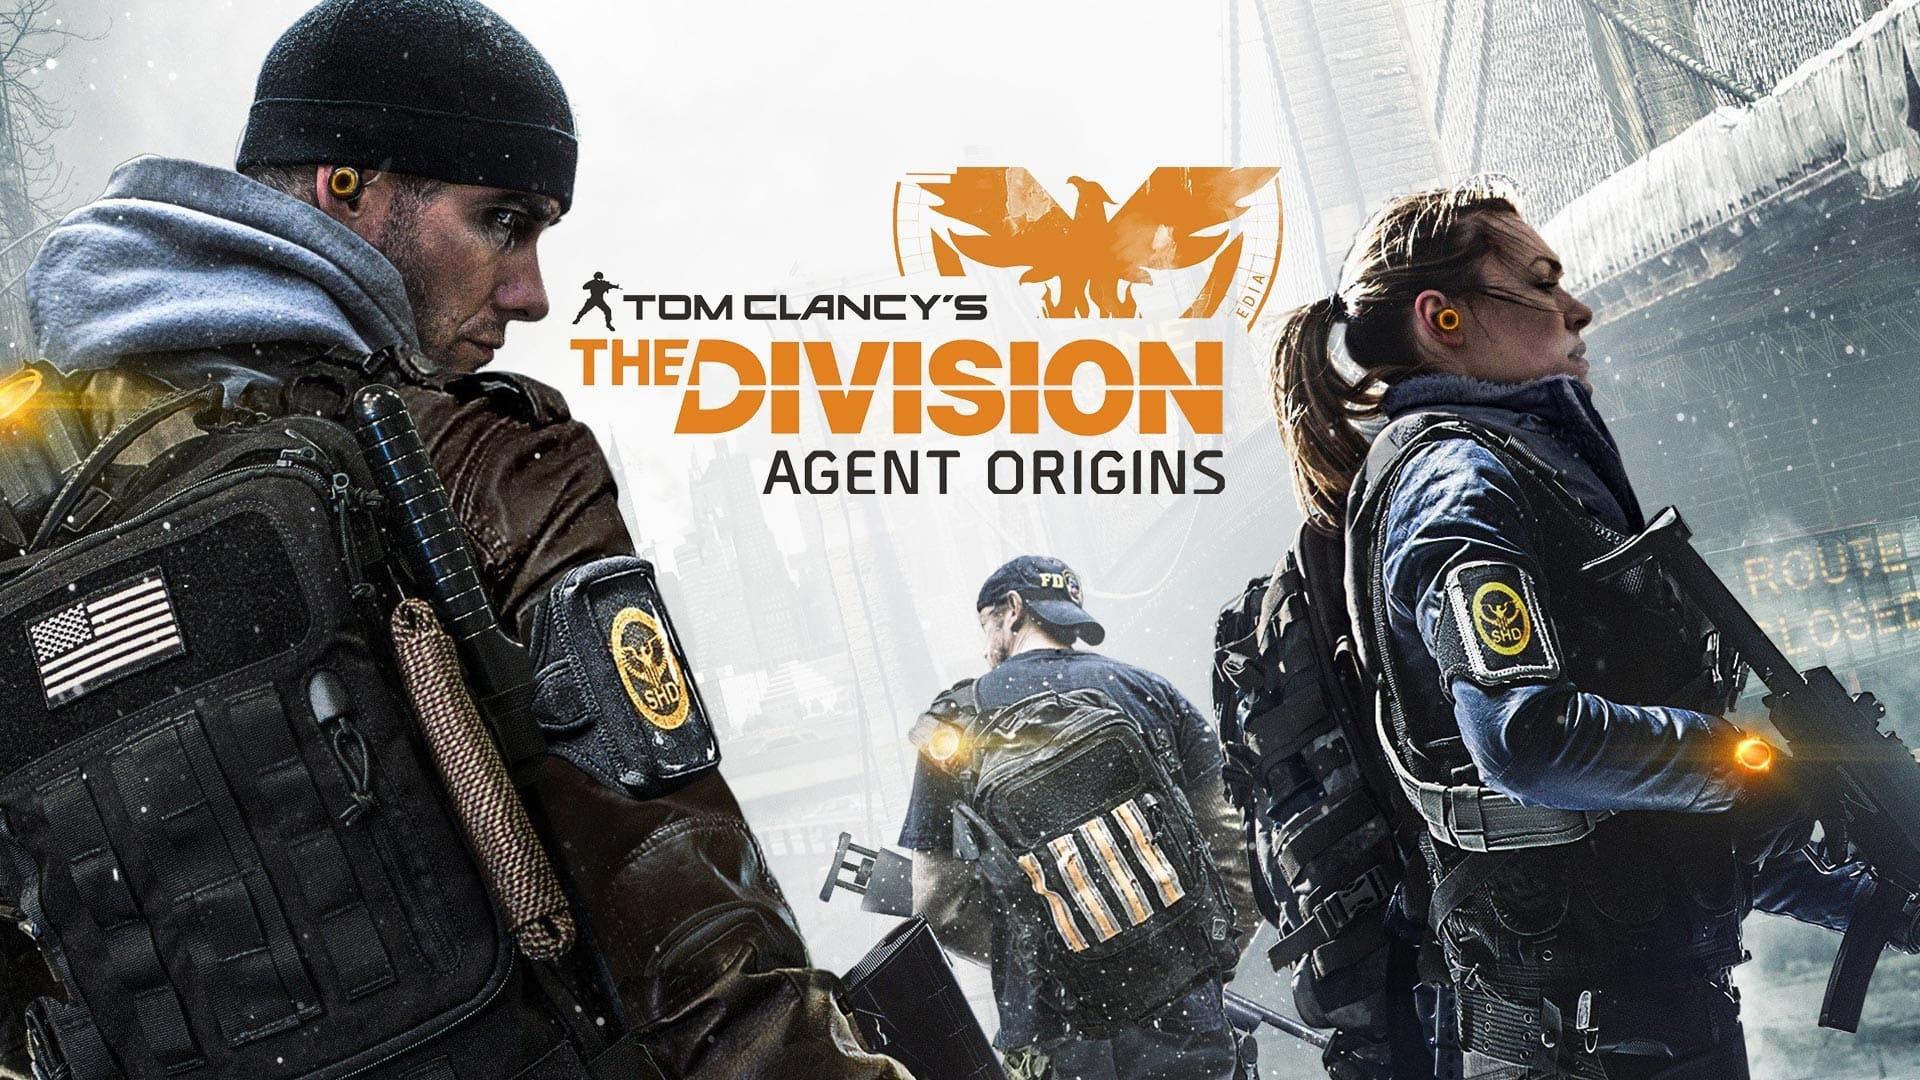 Tom Clancy's The Division: Agent Origins backdrop